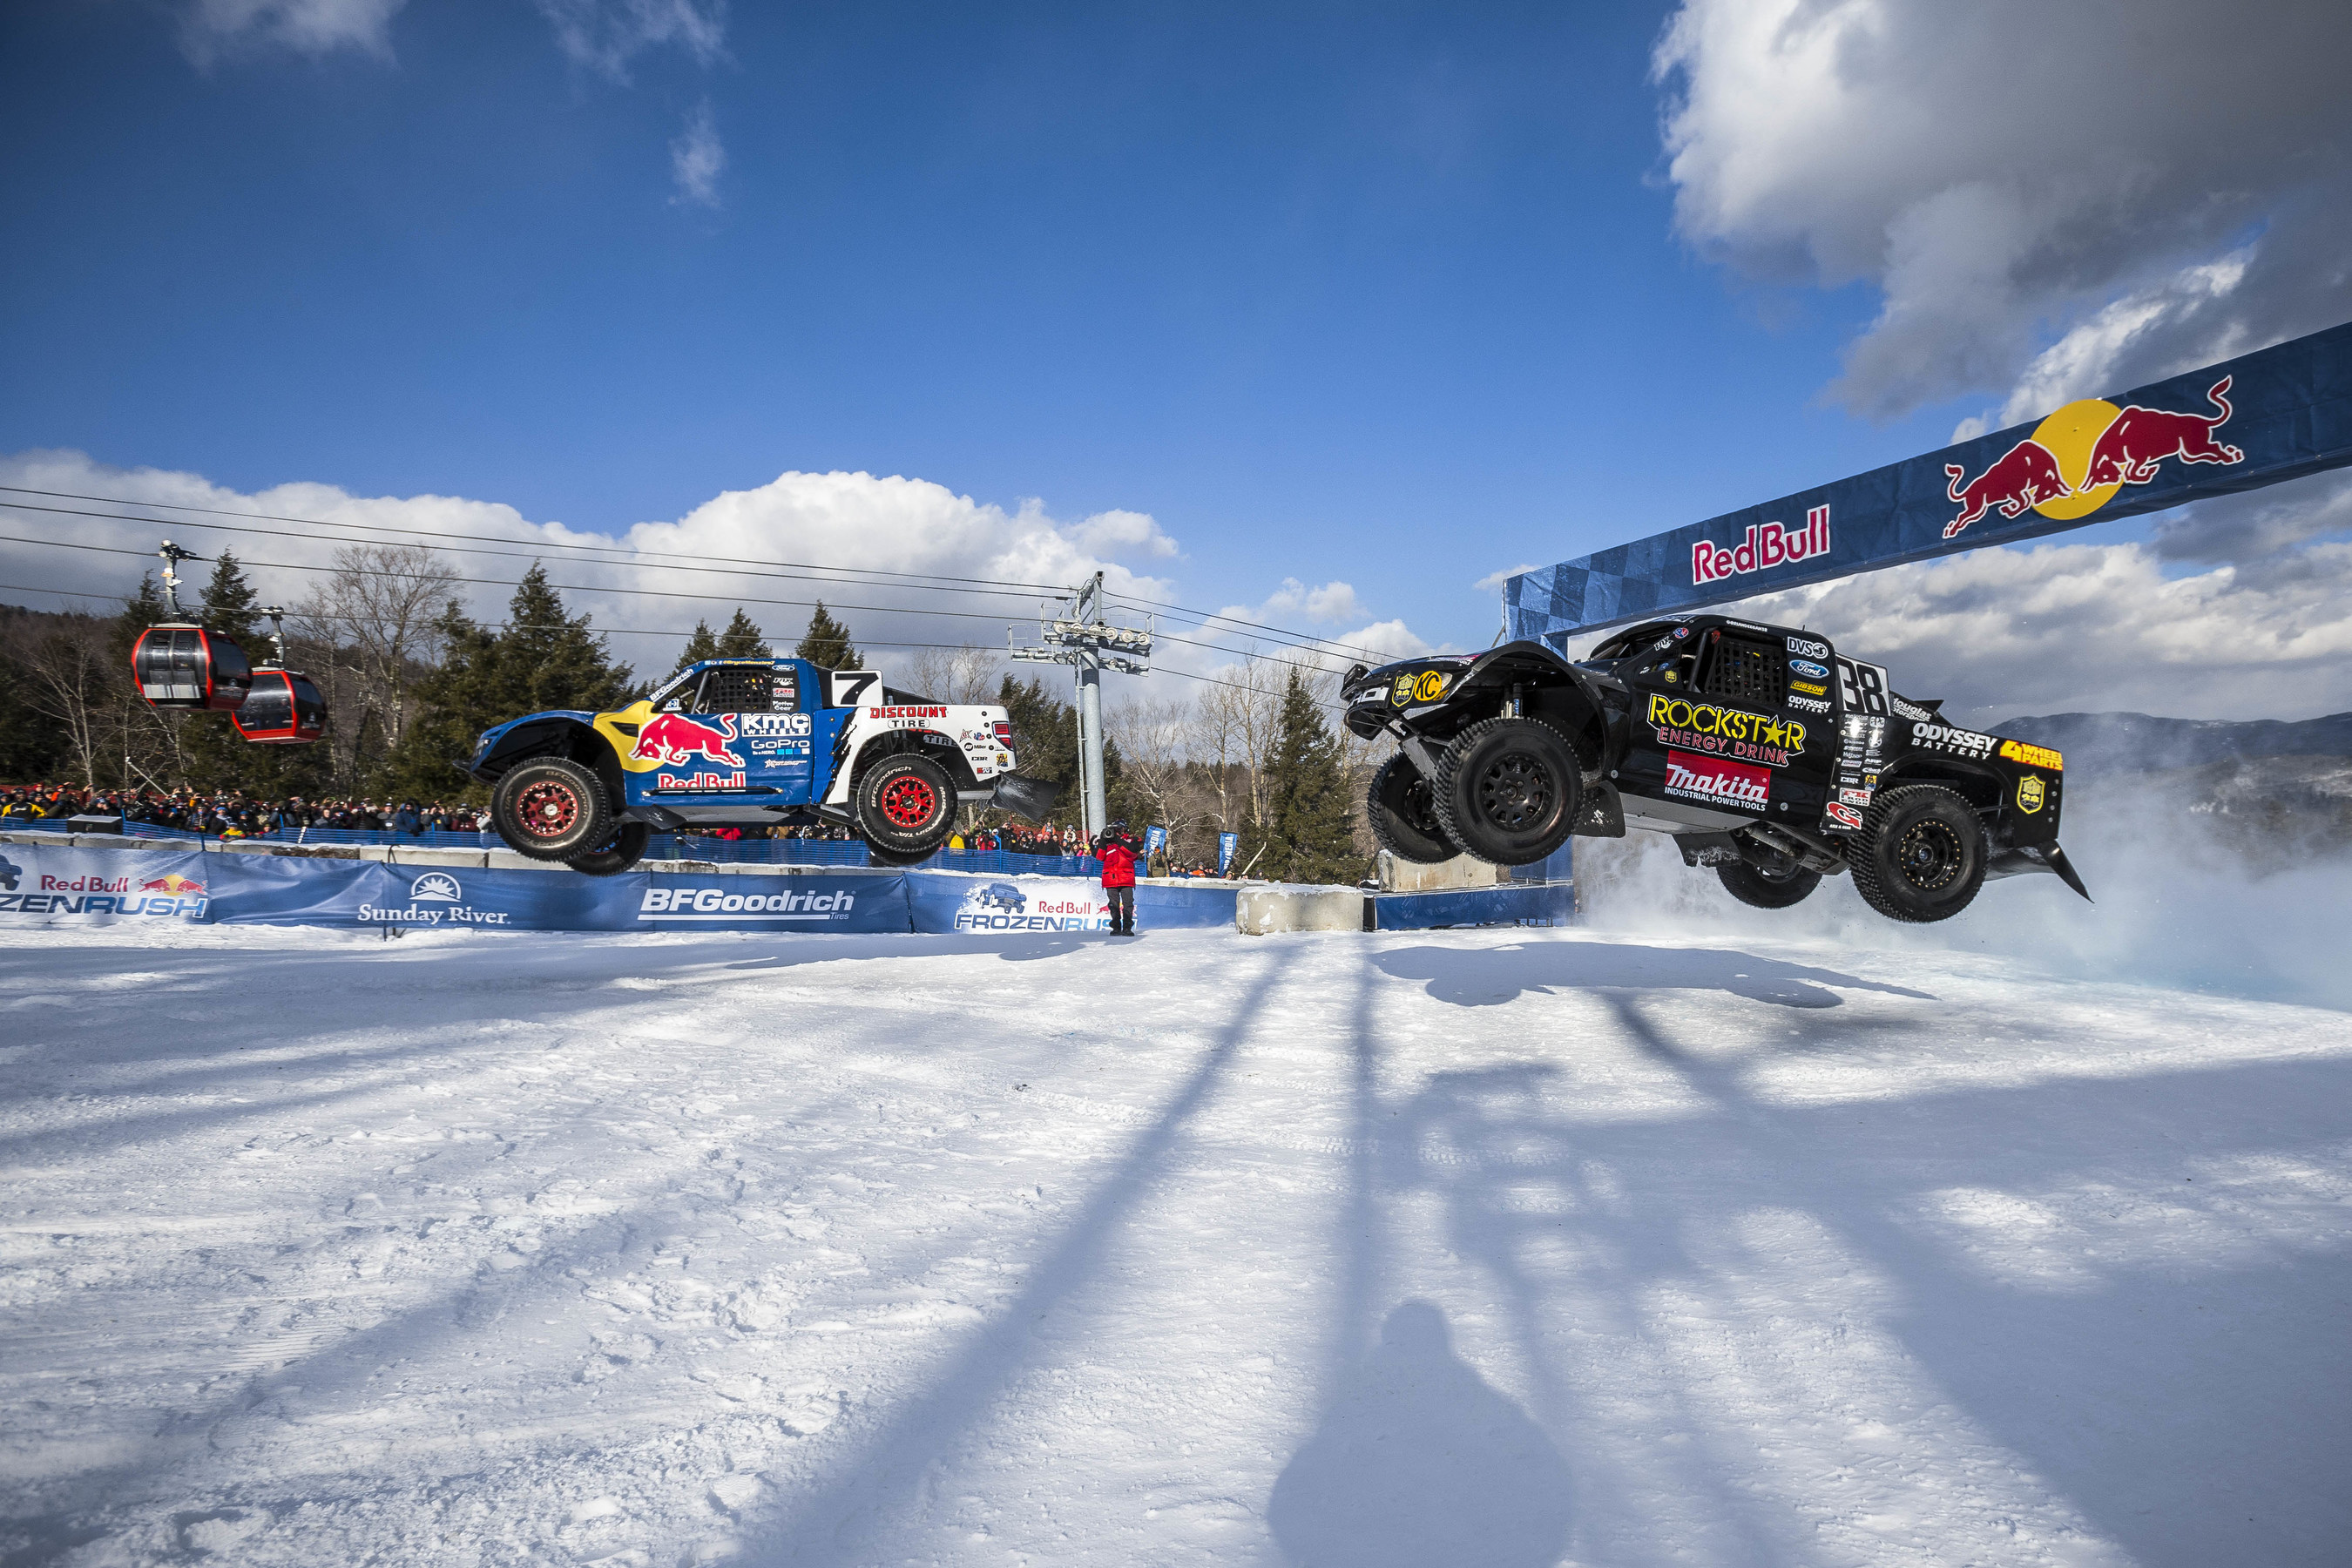 Off-road trucks race head-to-head on snow for Red Bull Frozen.